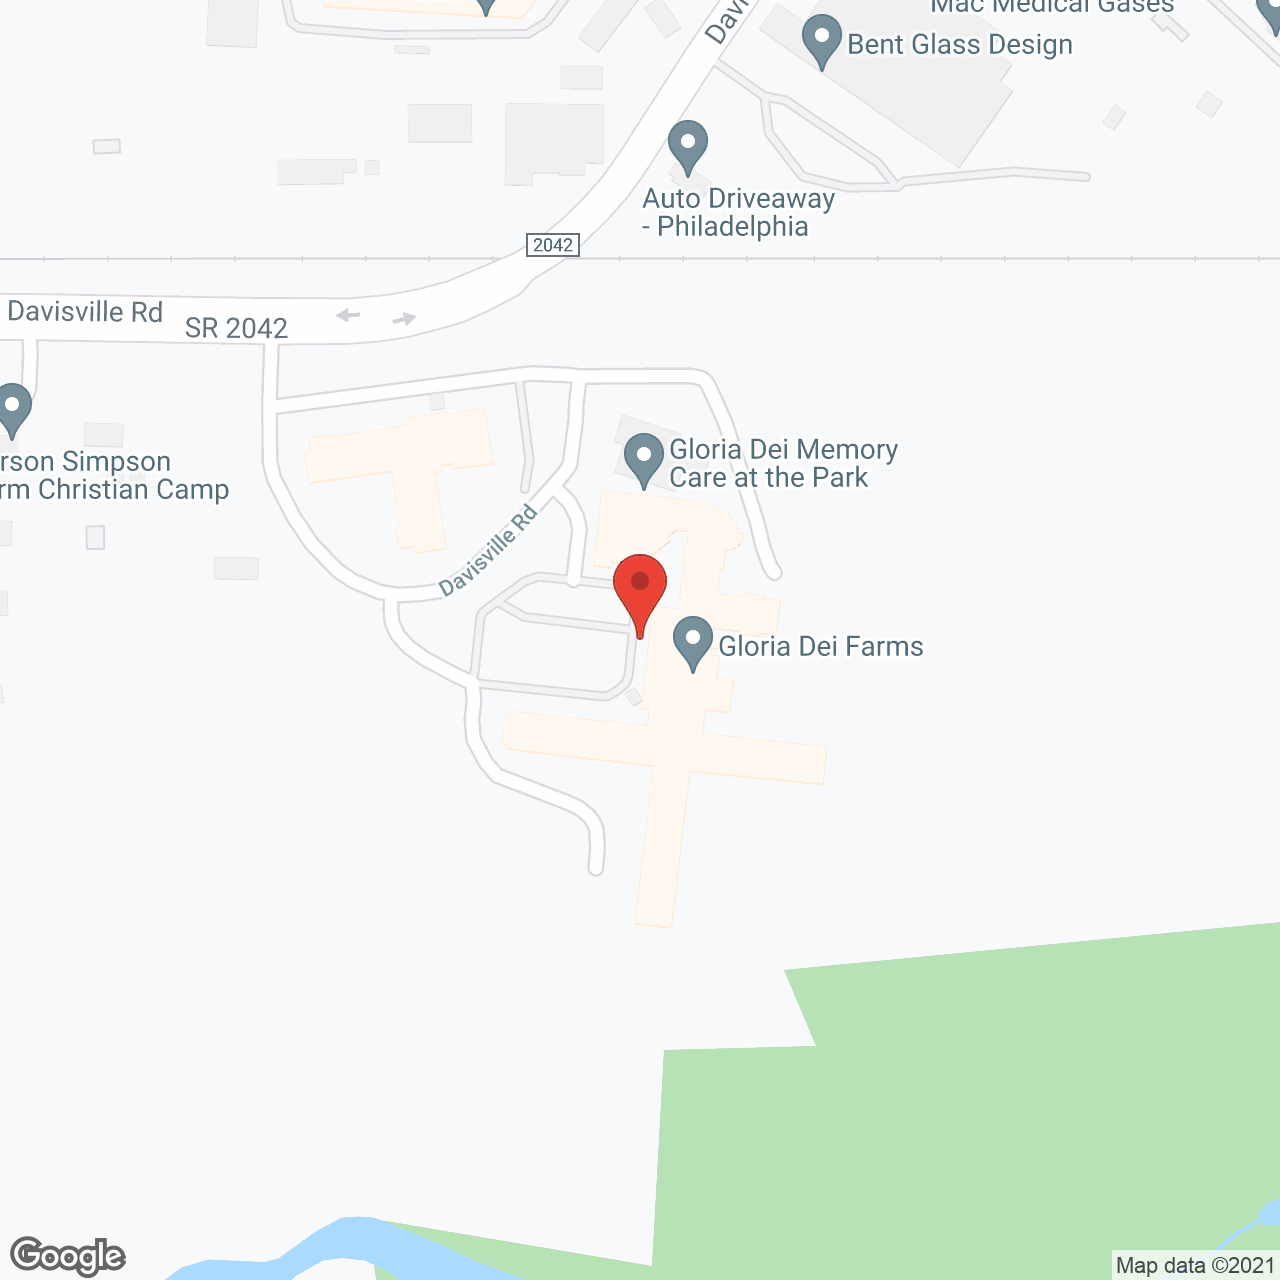 The Farms in google map